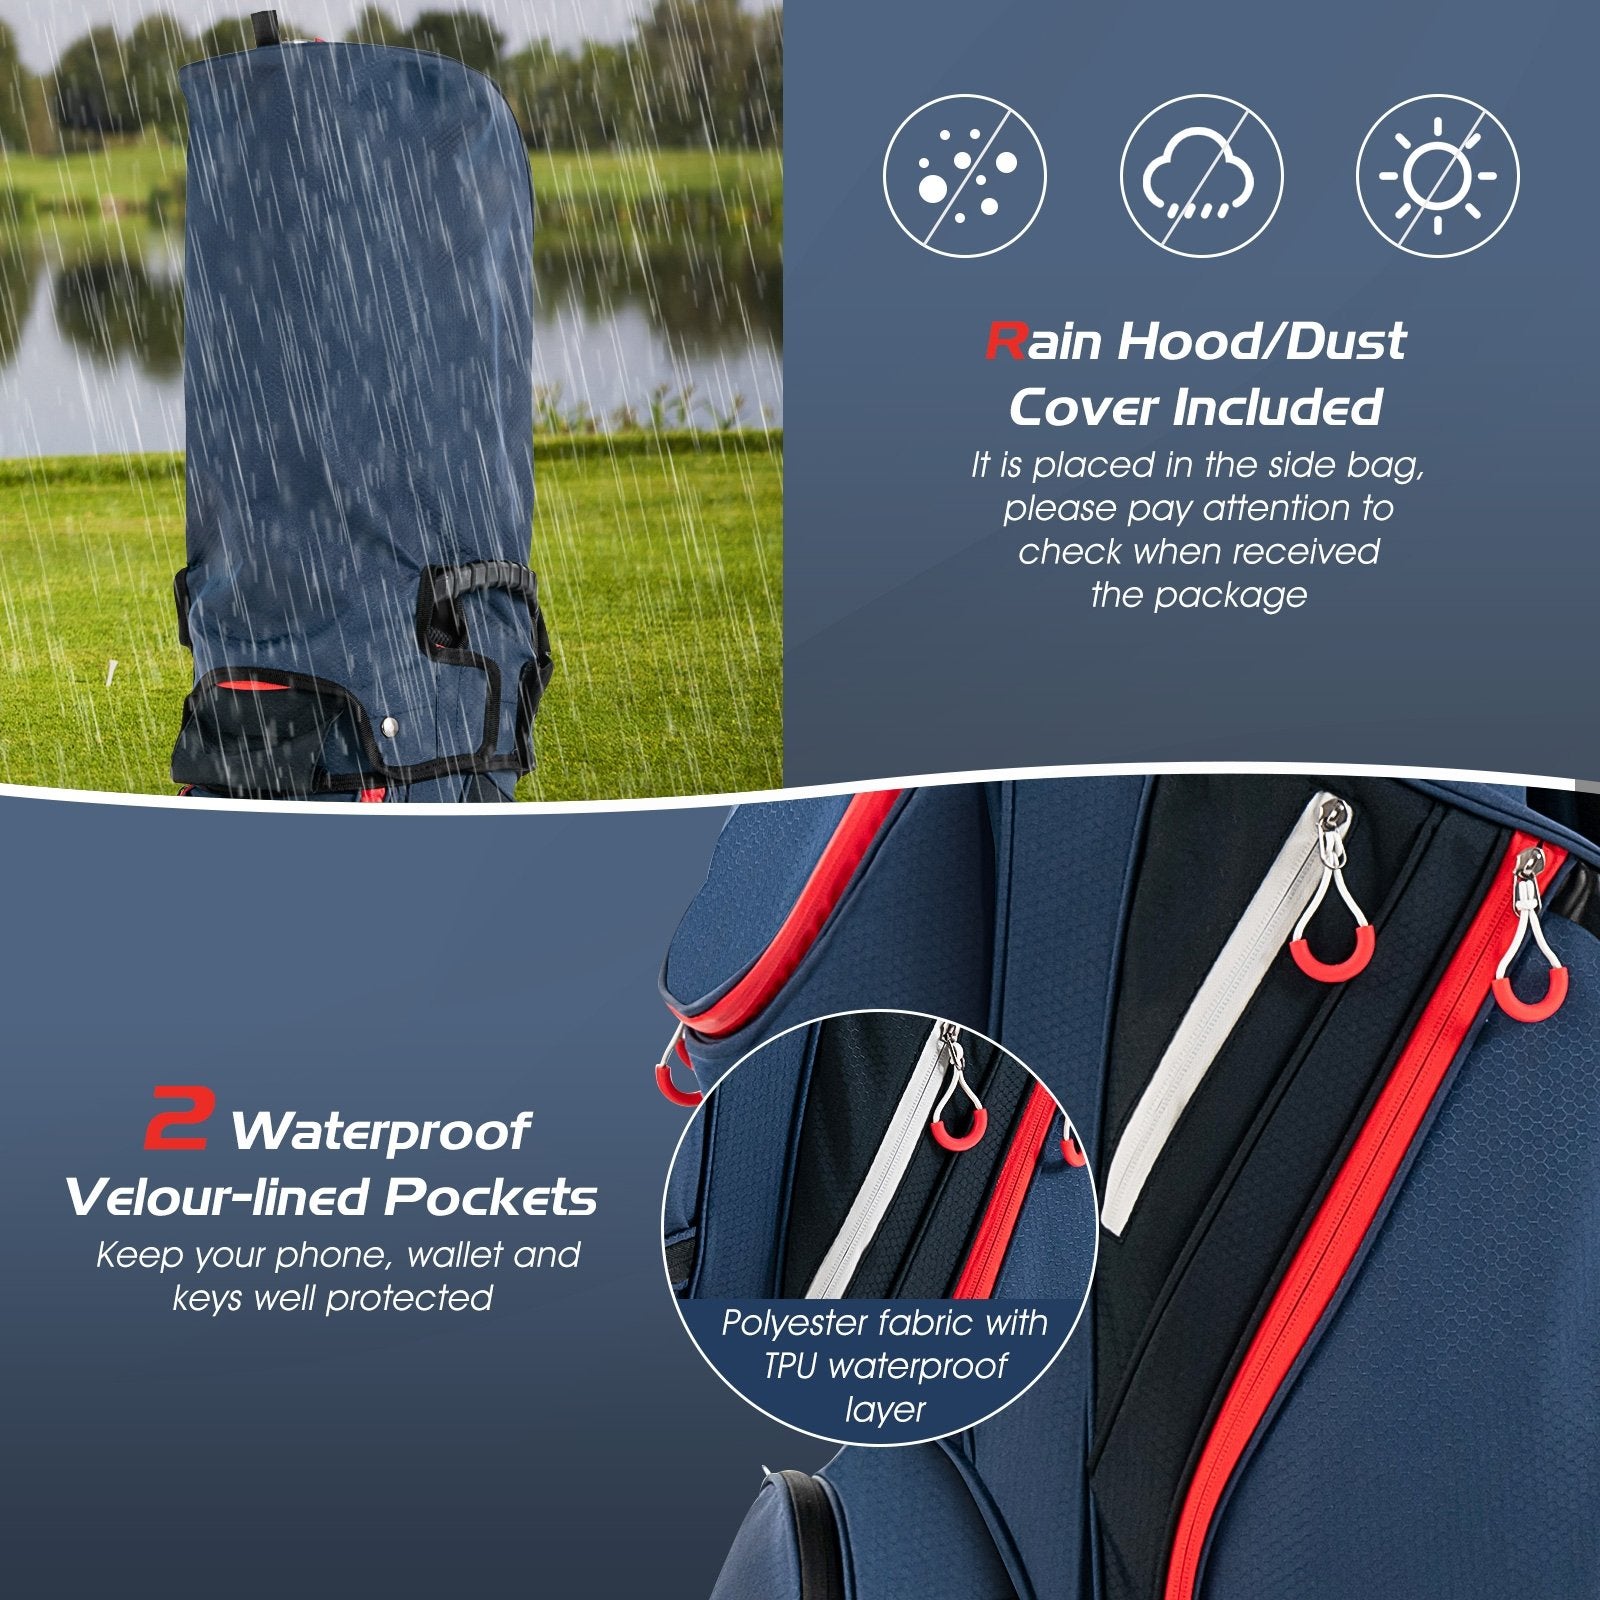 Lightweight and Large Capacity Golf Stand Bag, Navy Golf   at Gallery Canada